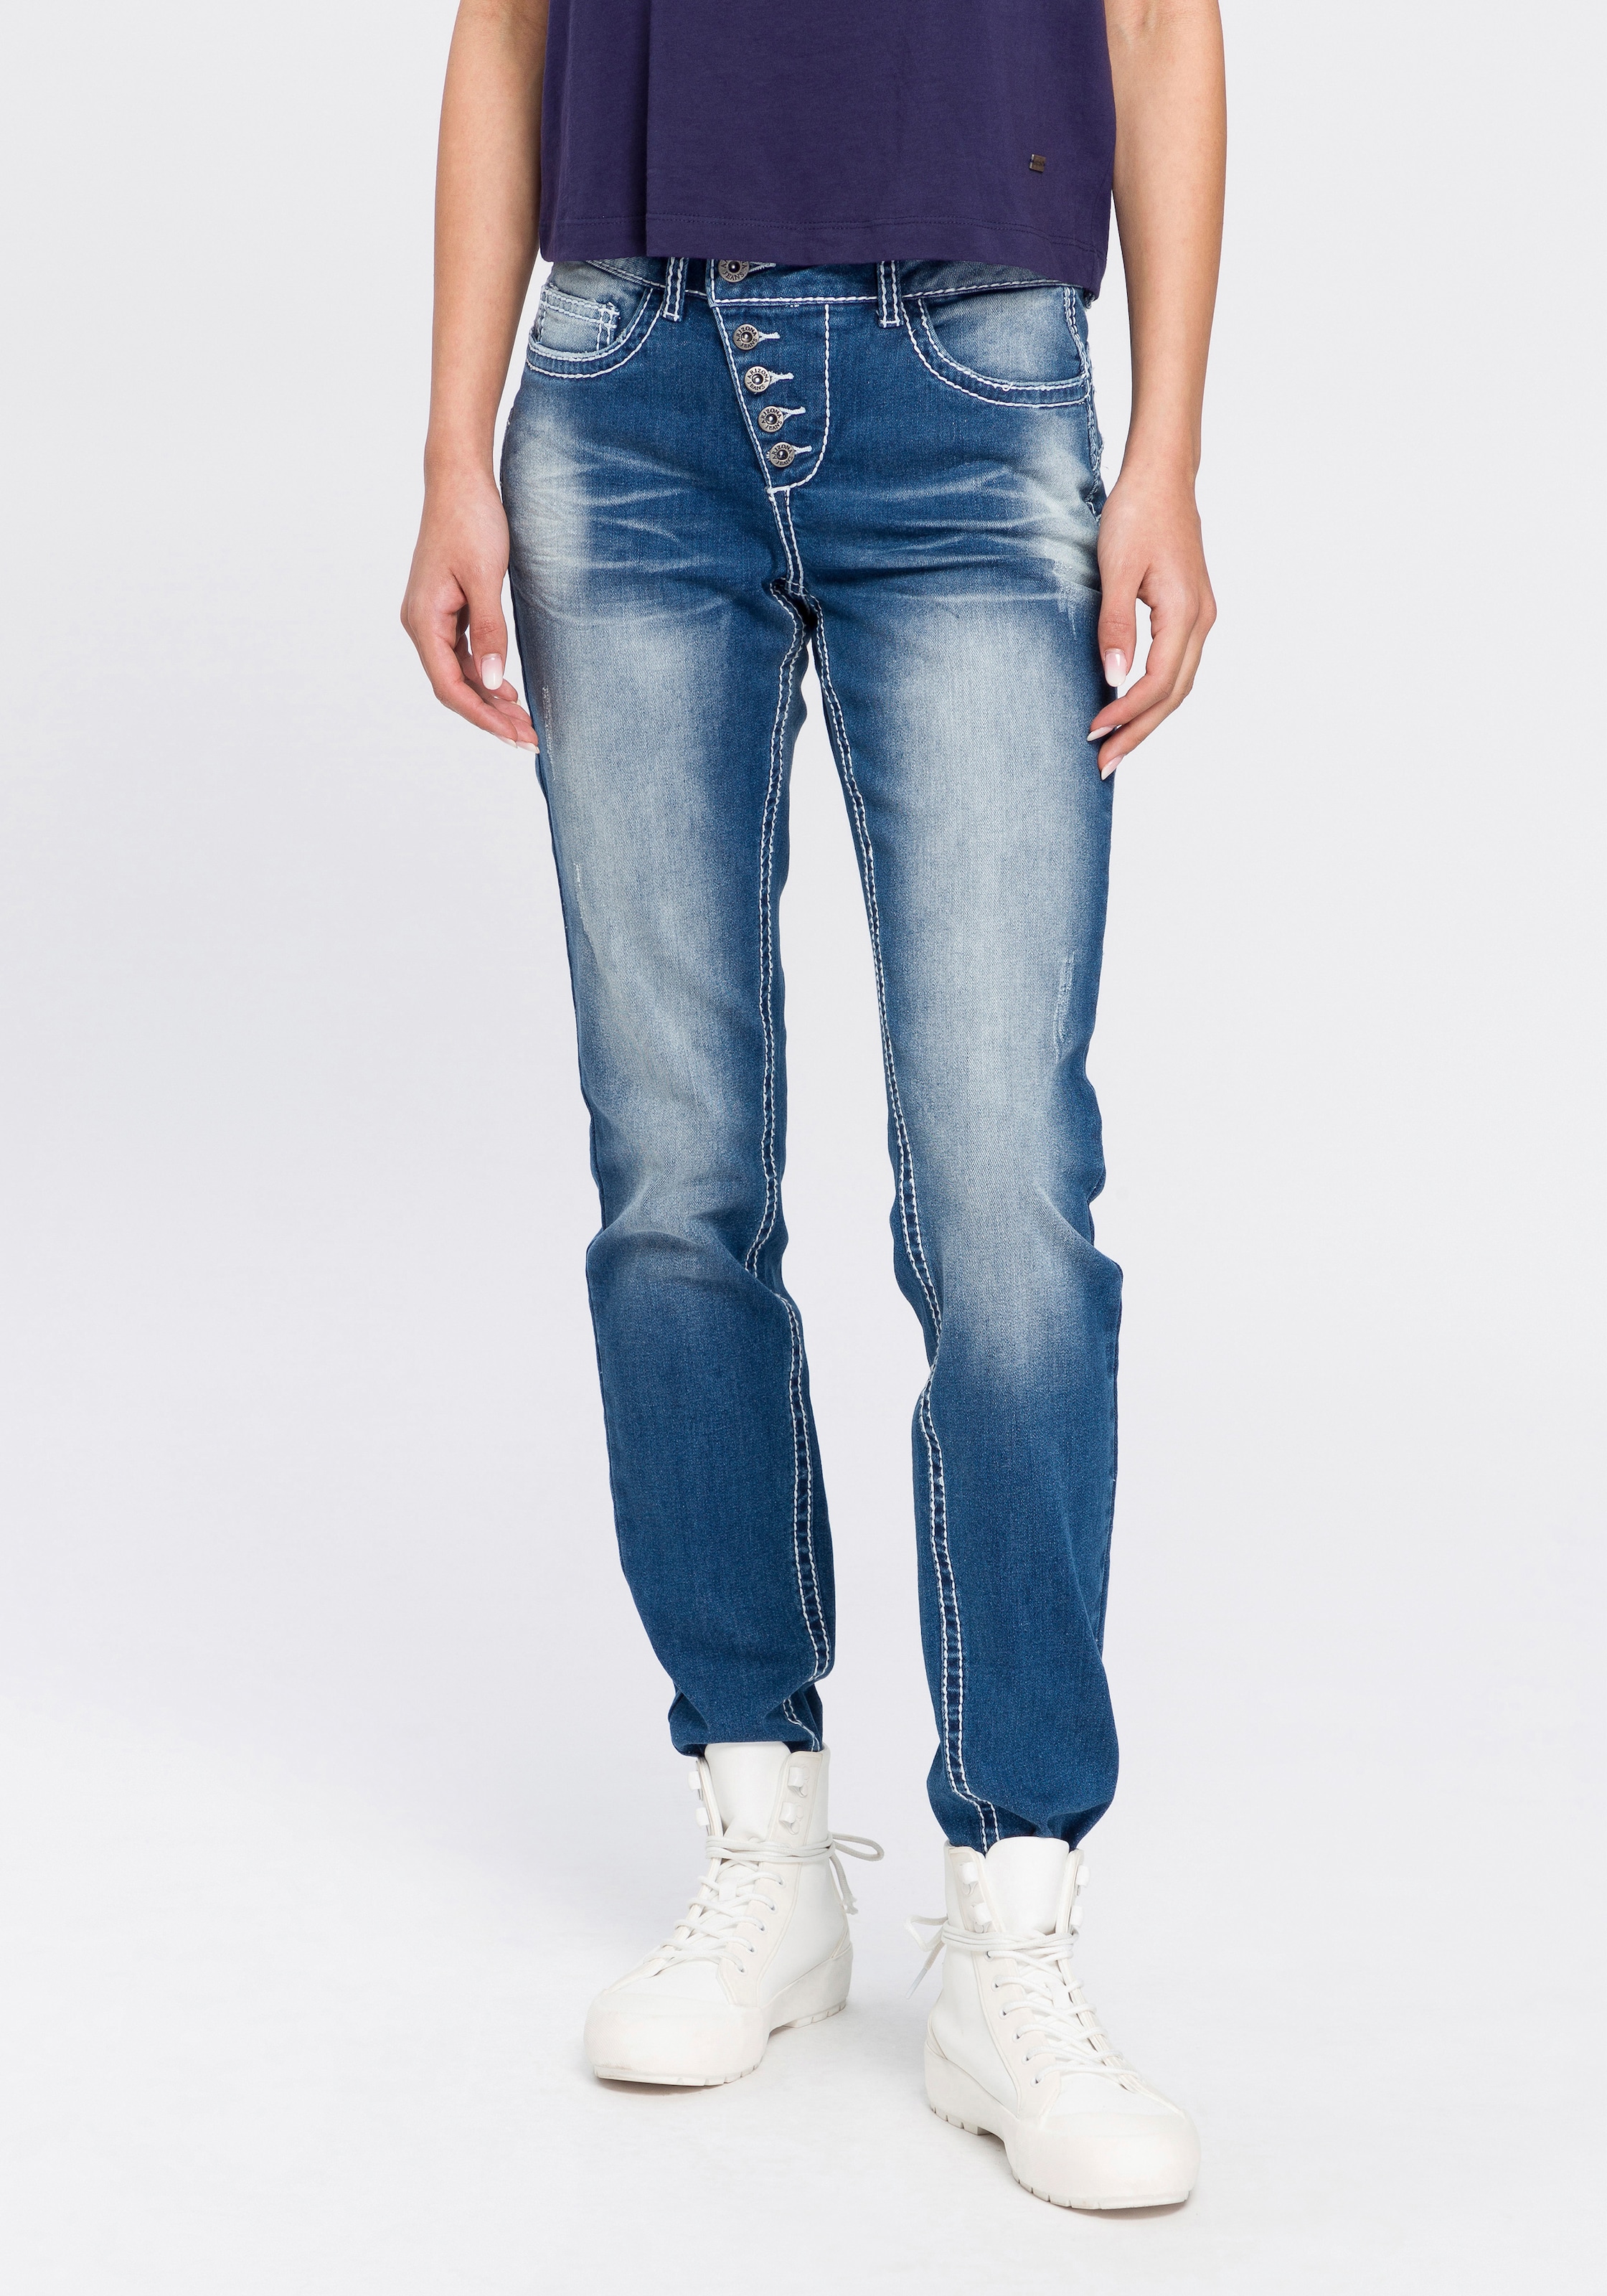 bei - »Heavy Waist Slim-fit-Jeans OTTOversand Shaping«, Arizona Mid Washed